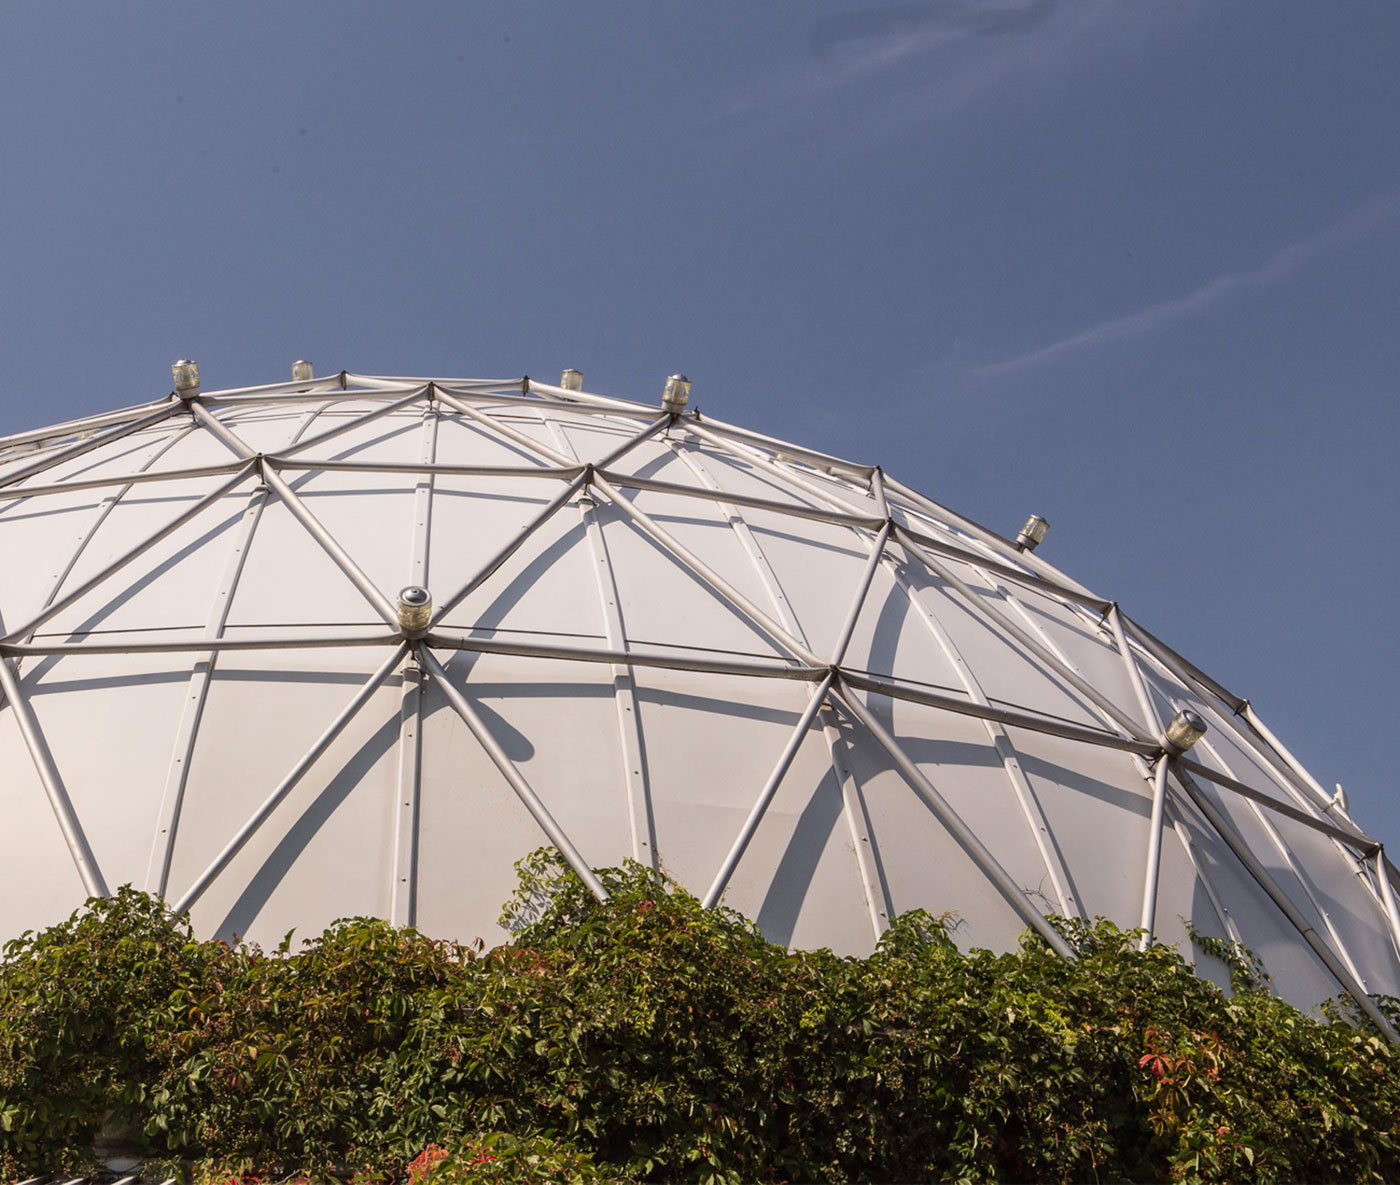 Part of the Cinesphere at Ontario Place